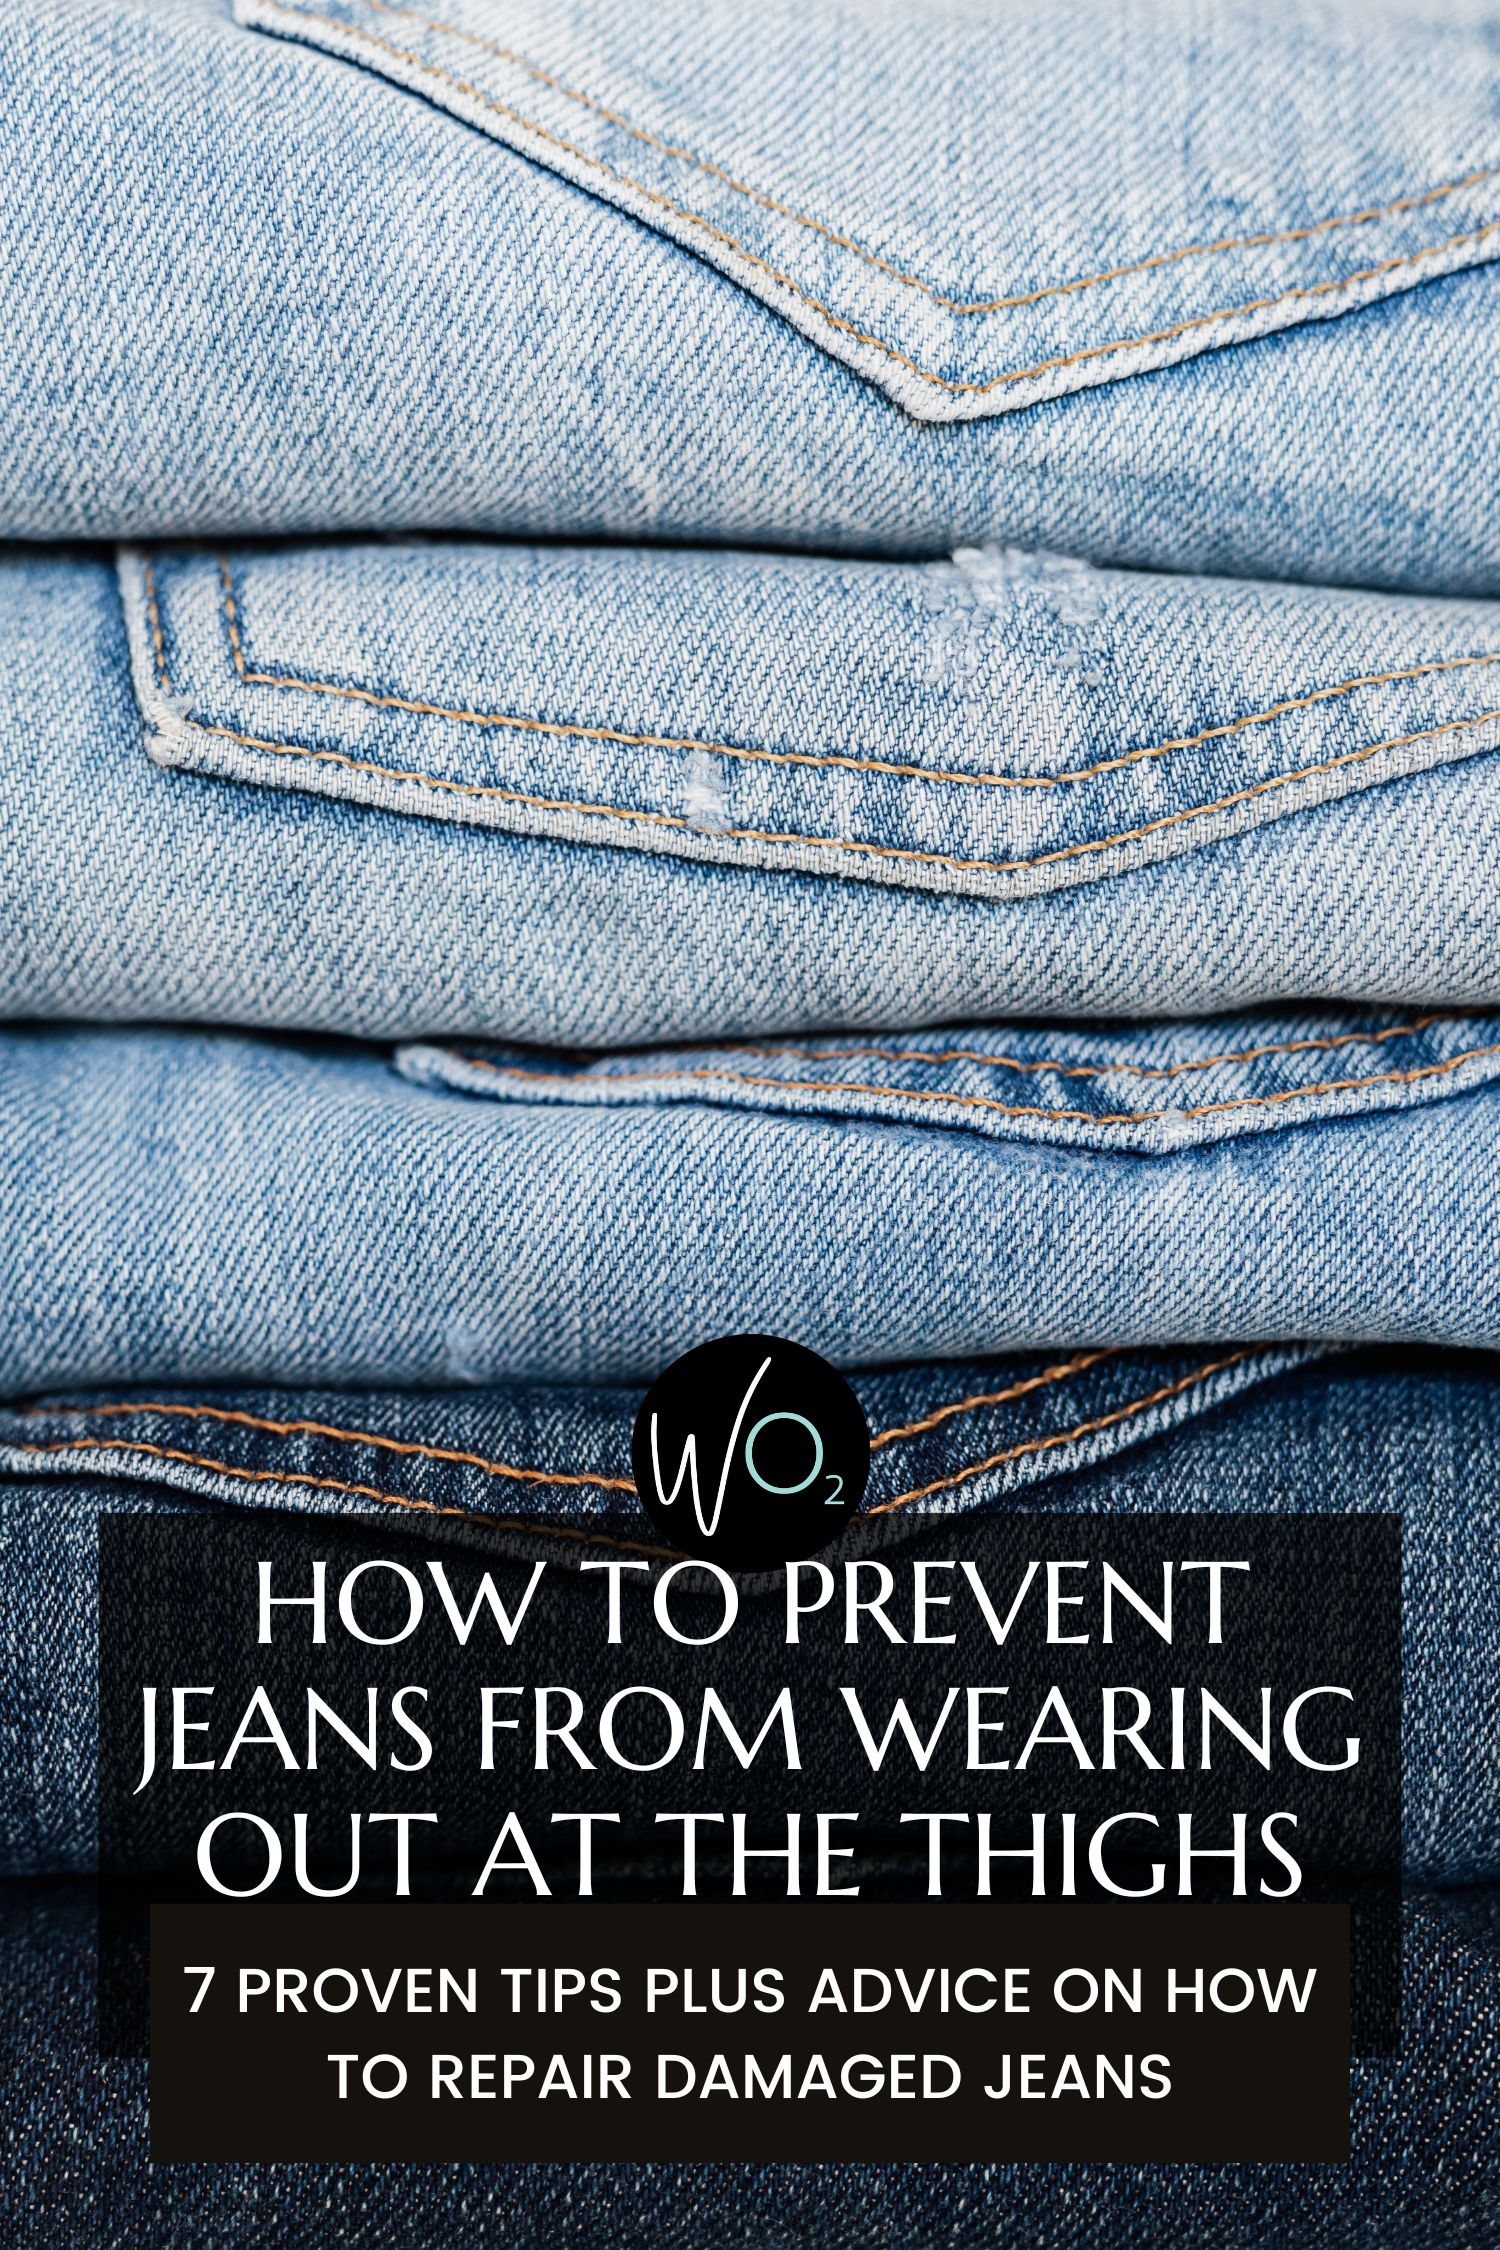 Pre-stained pants: Does this idea stink?